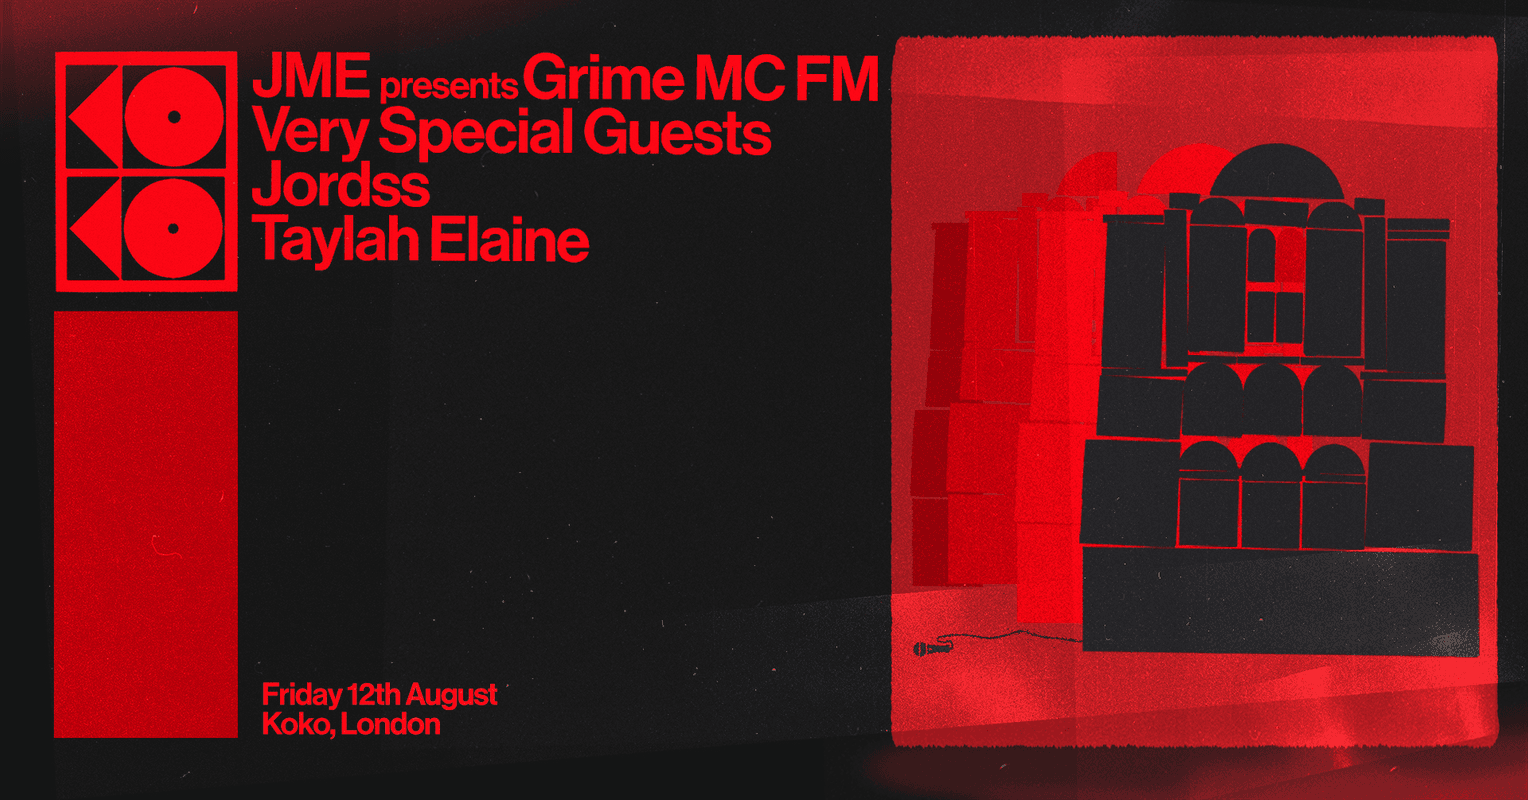 JME presents Grime MC FM with Very Special Guests's event image